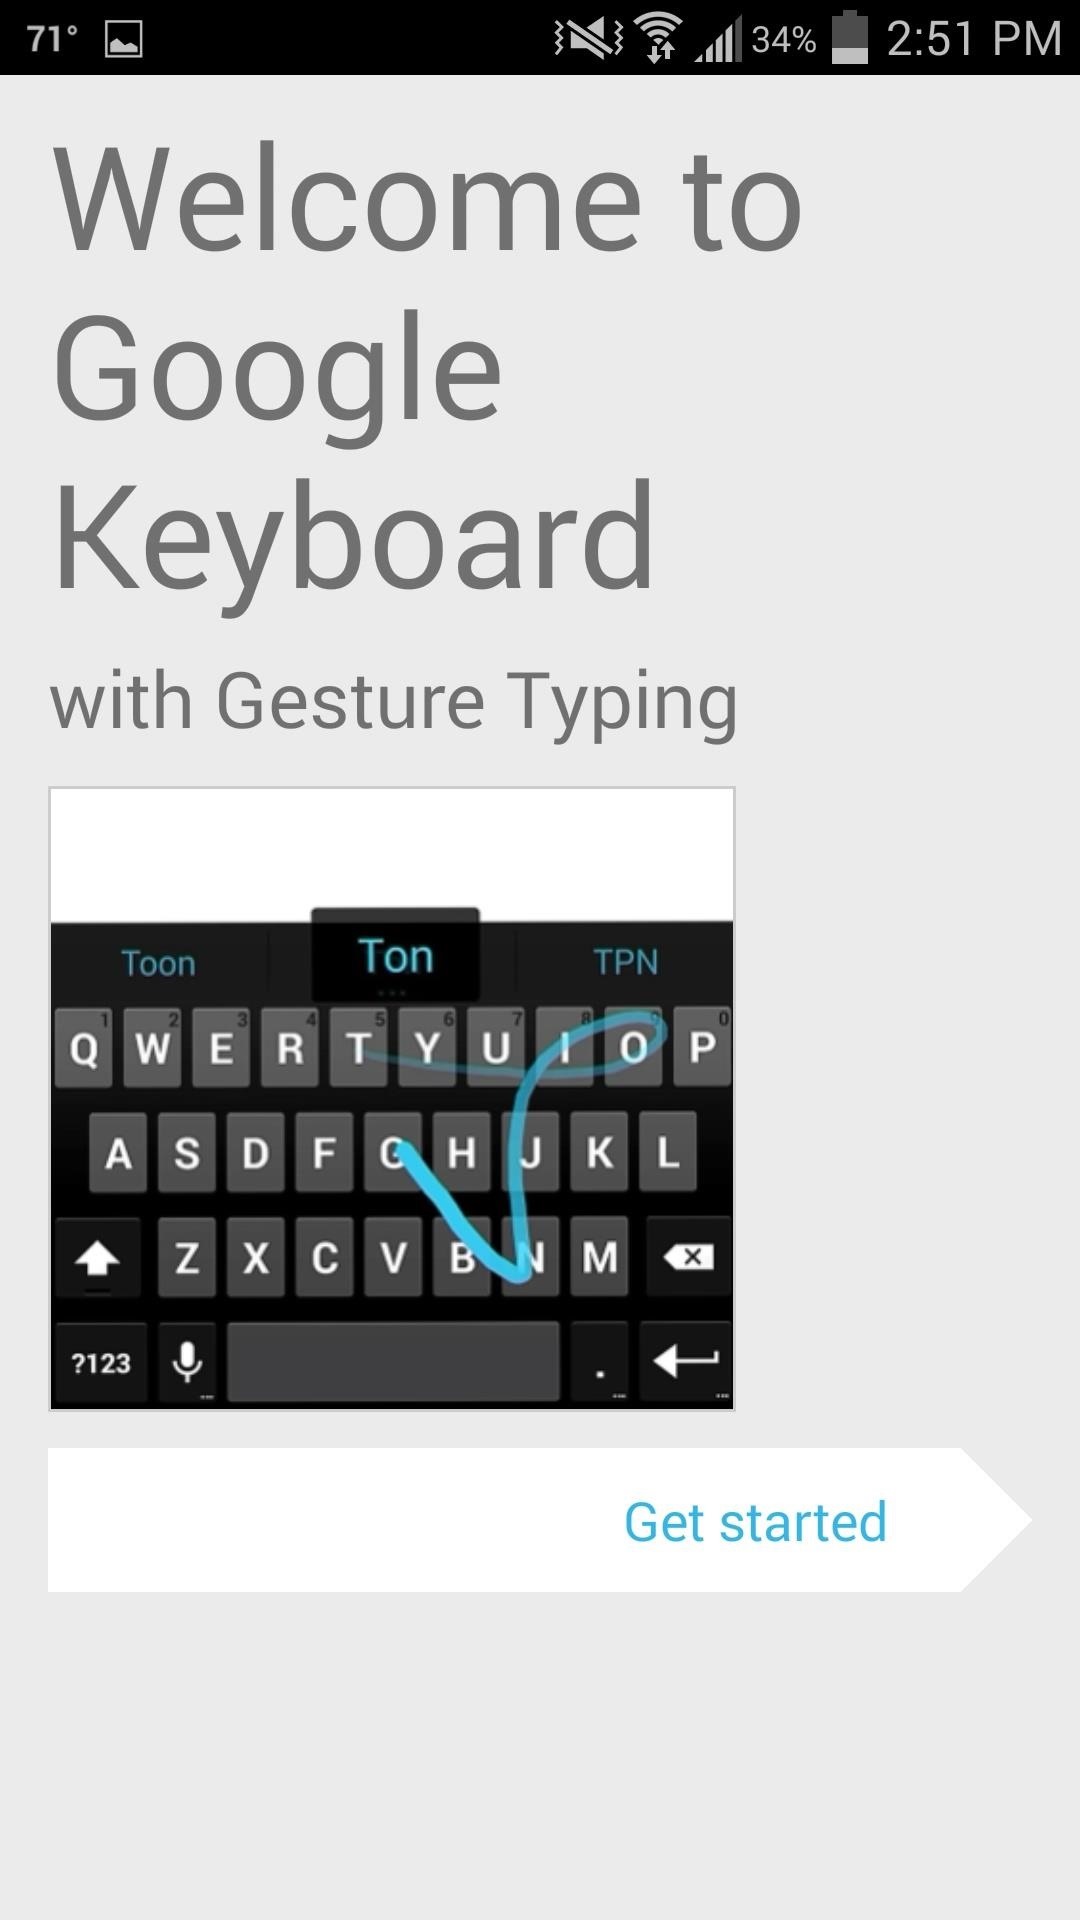 How to Add a Number Row to the Google Keyboard on Your Galaxy S4 or Other Android Device